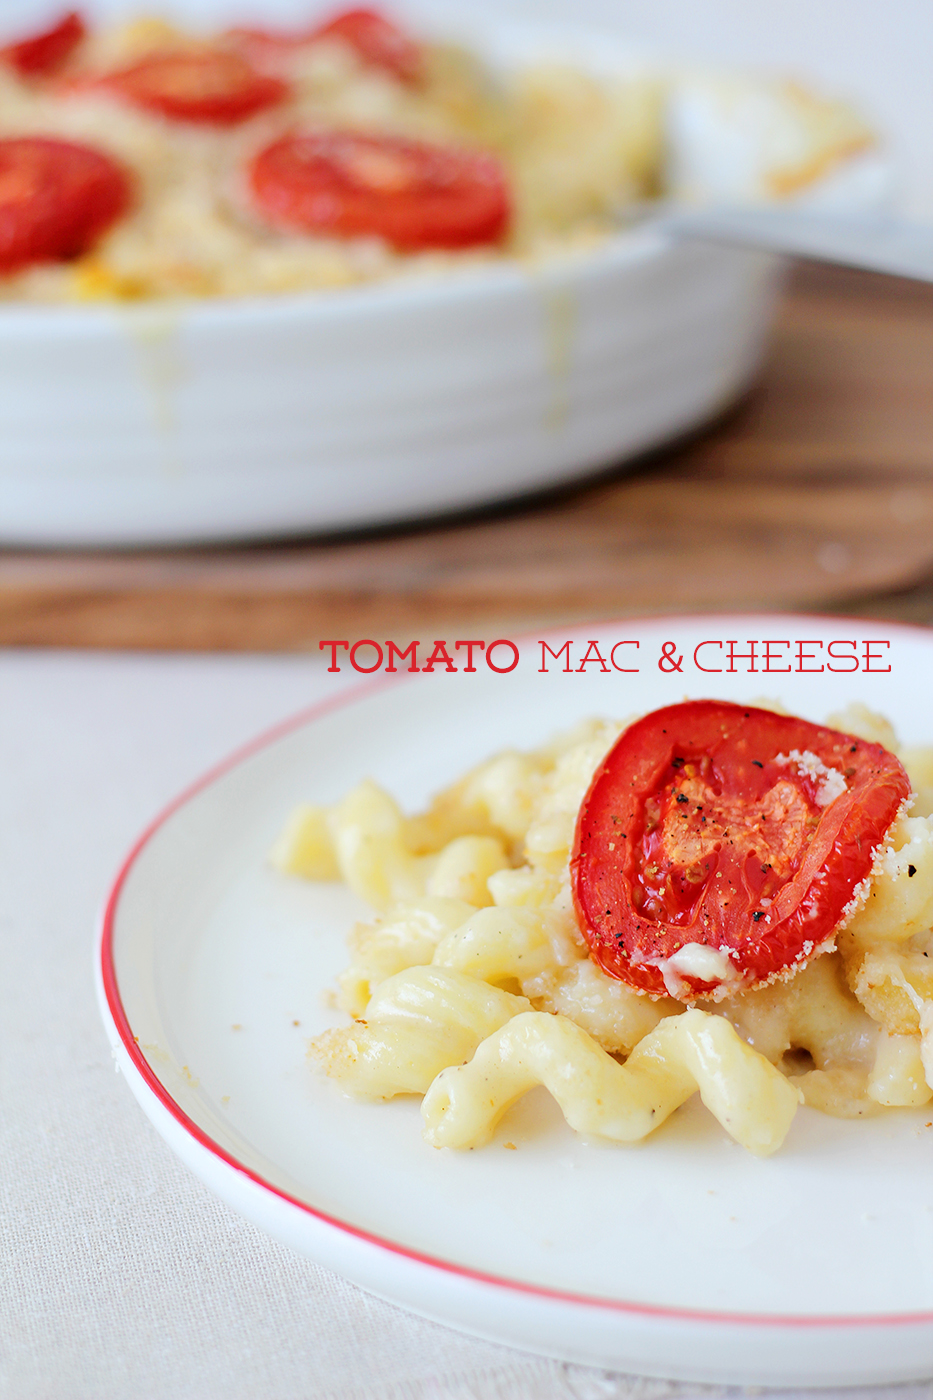 For diners big and small: Tomato mac & cheese - Splash of Something